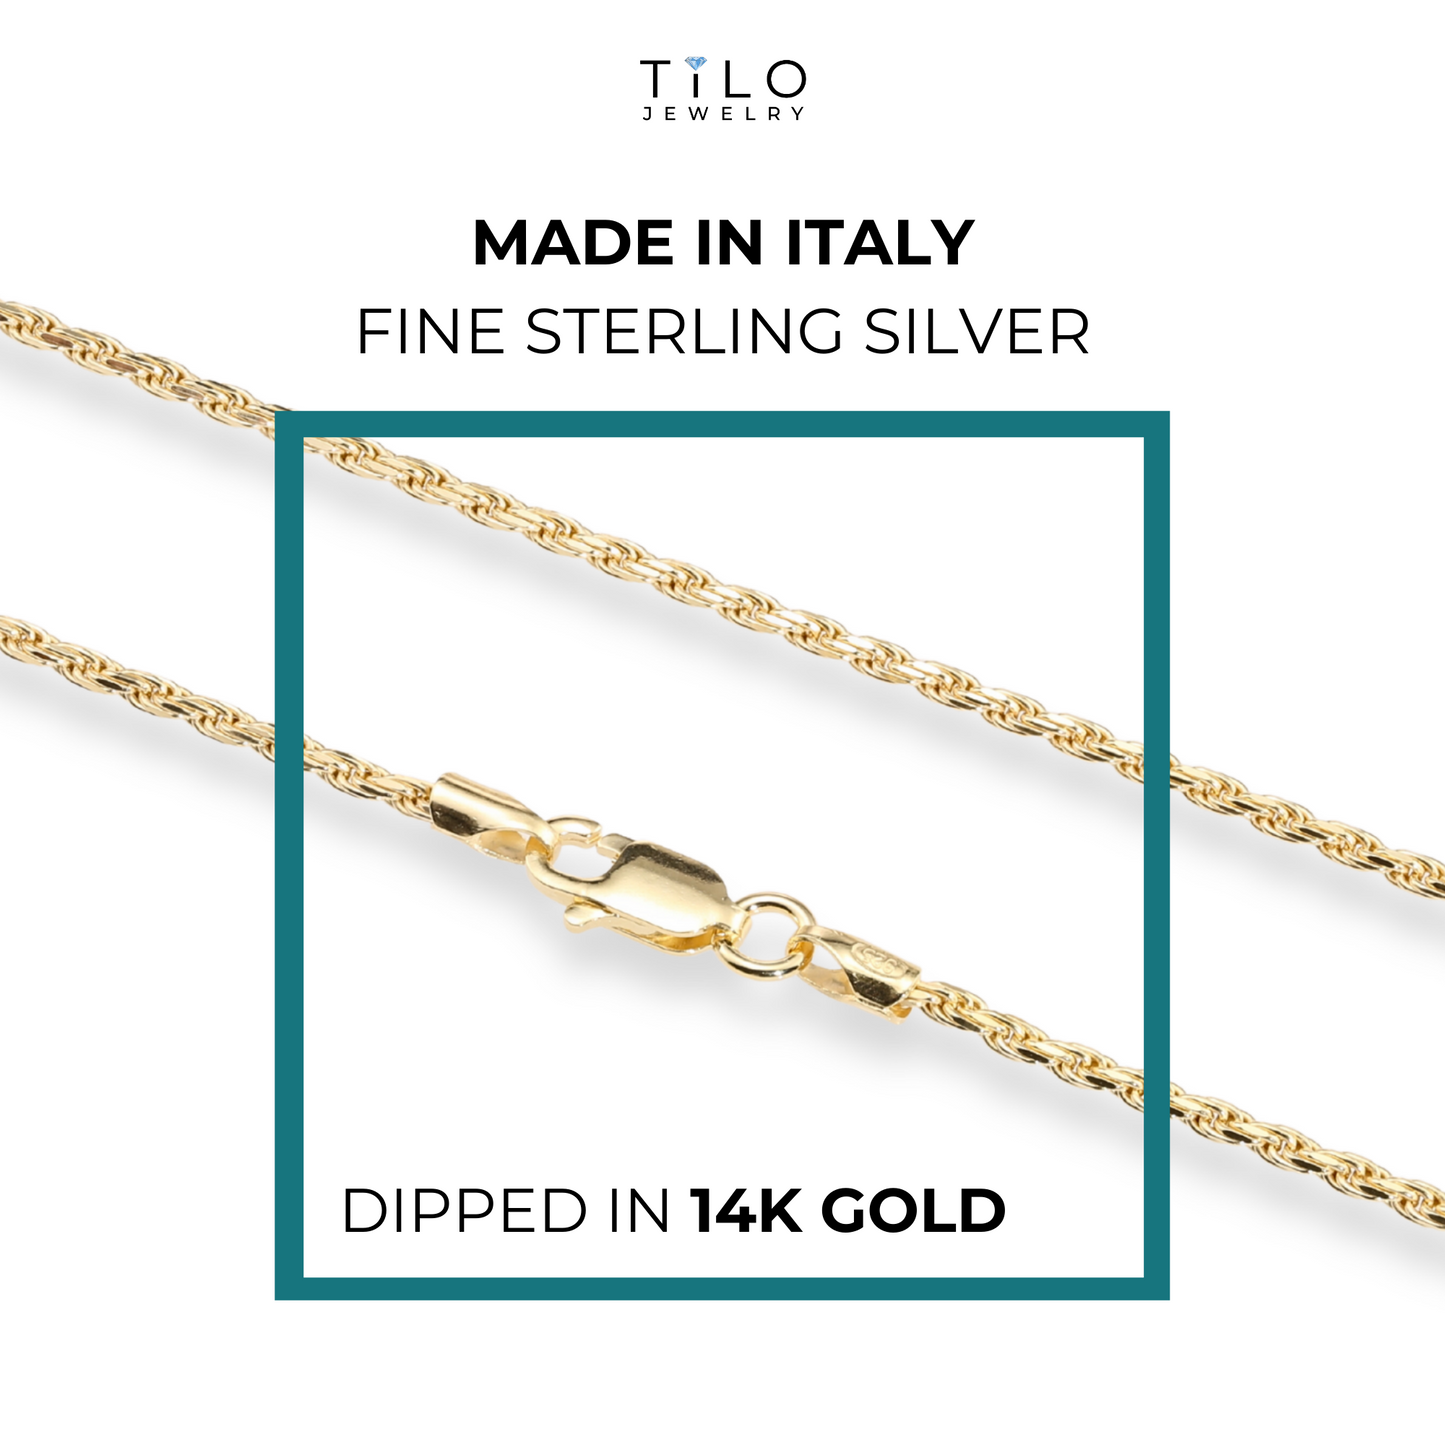 14k Gold Rope Chains, Solid 925 Silver Dipped in 14k Gold, Made in Italy, Strong Necklace with Lobster Lock